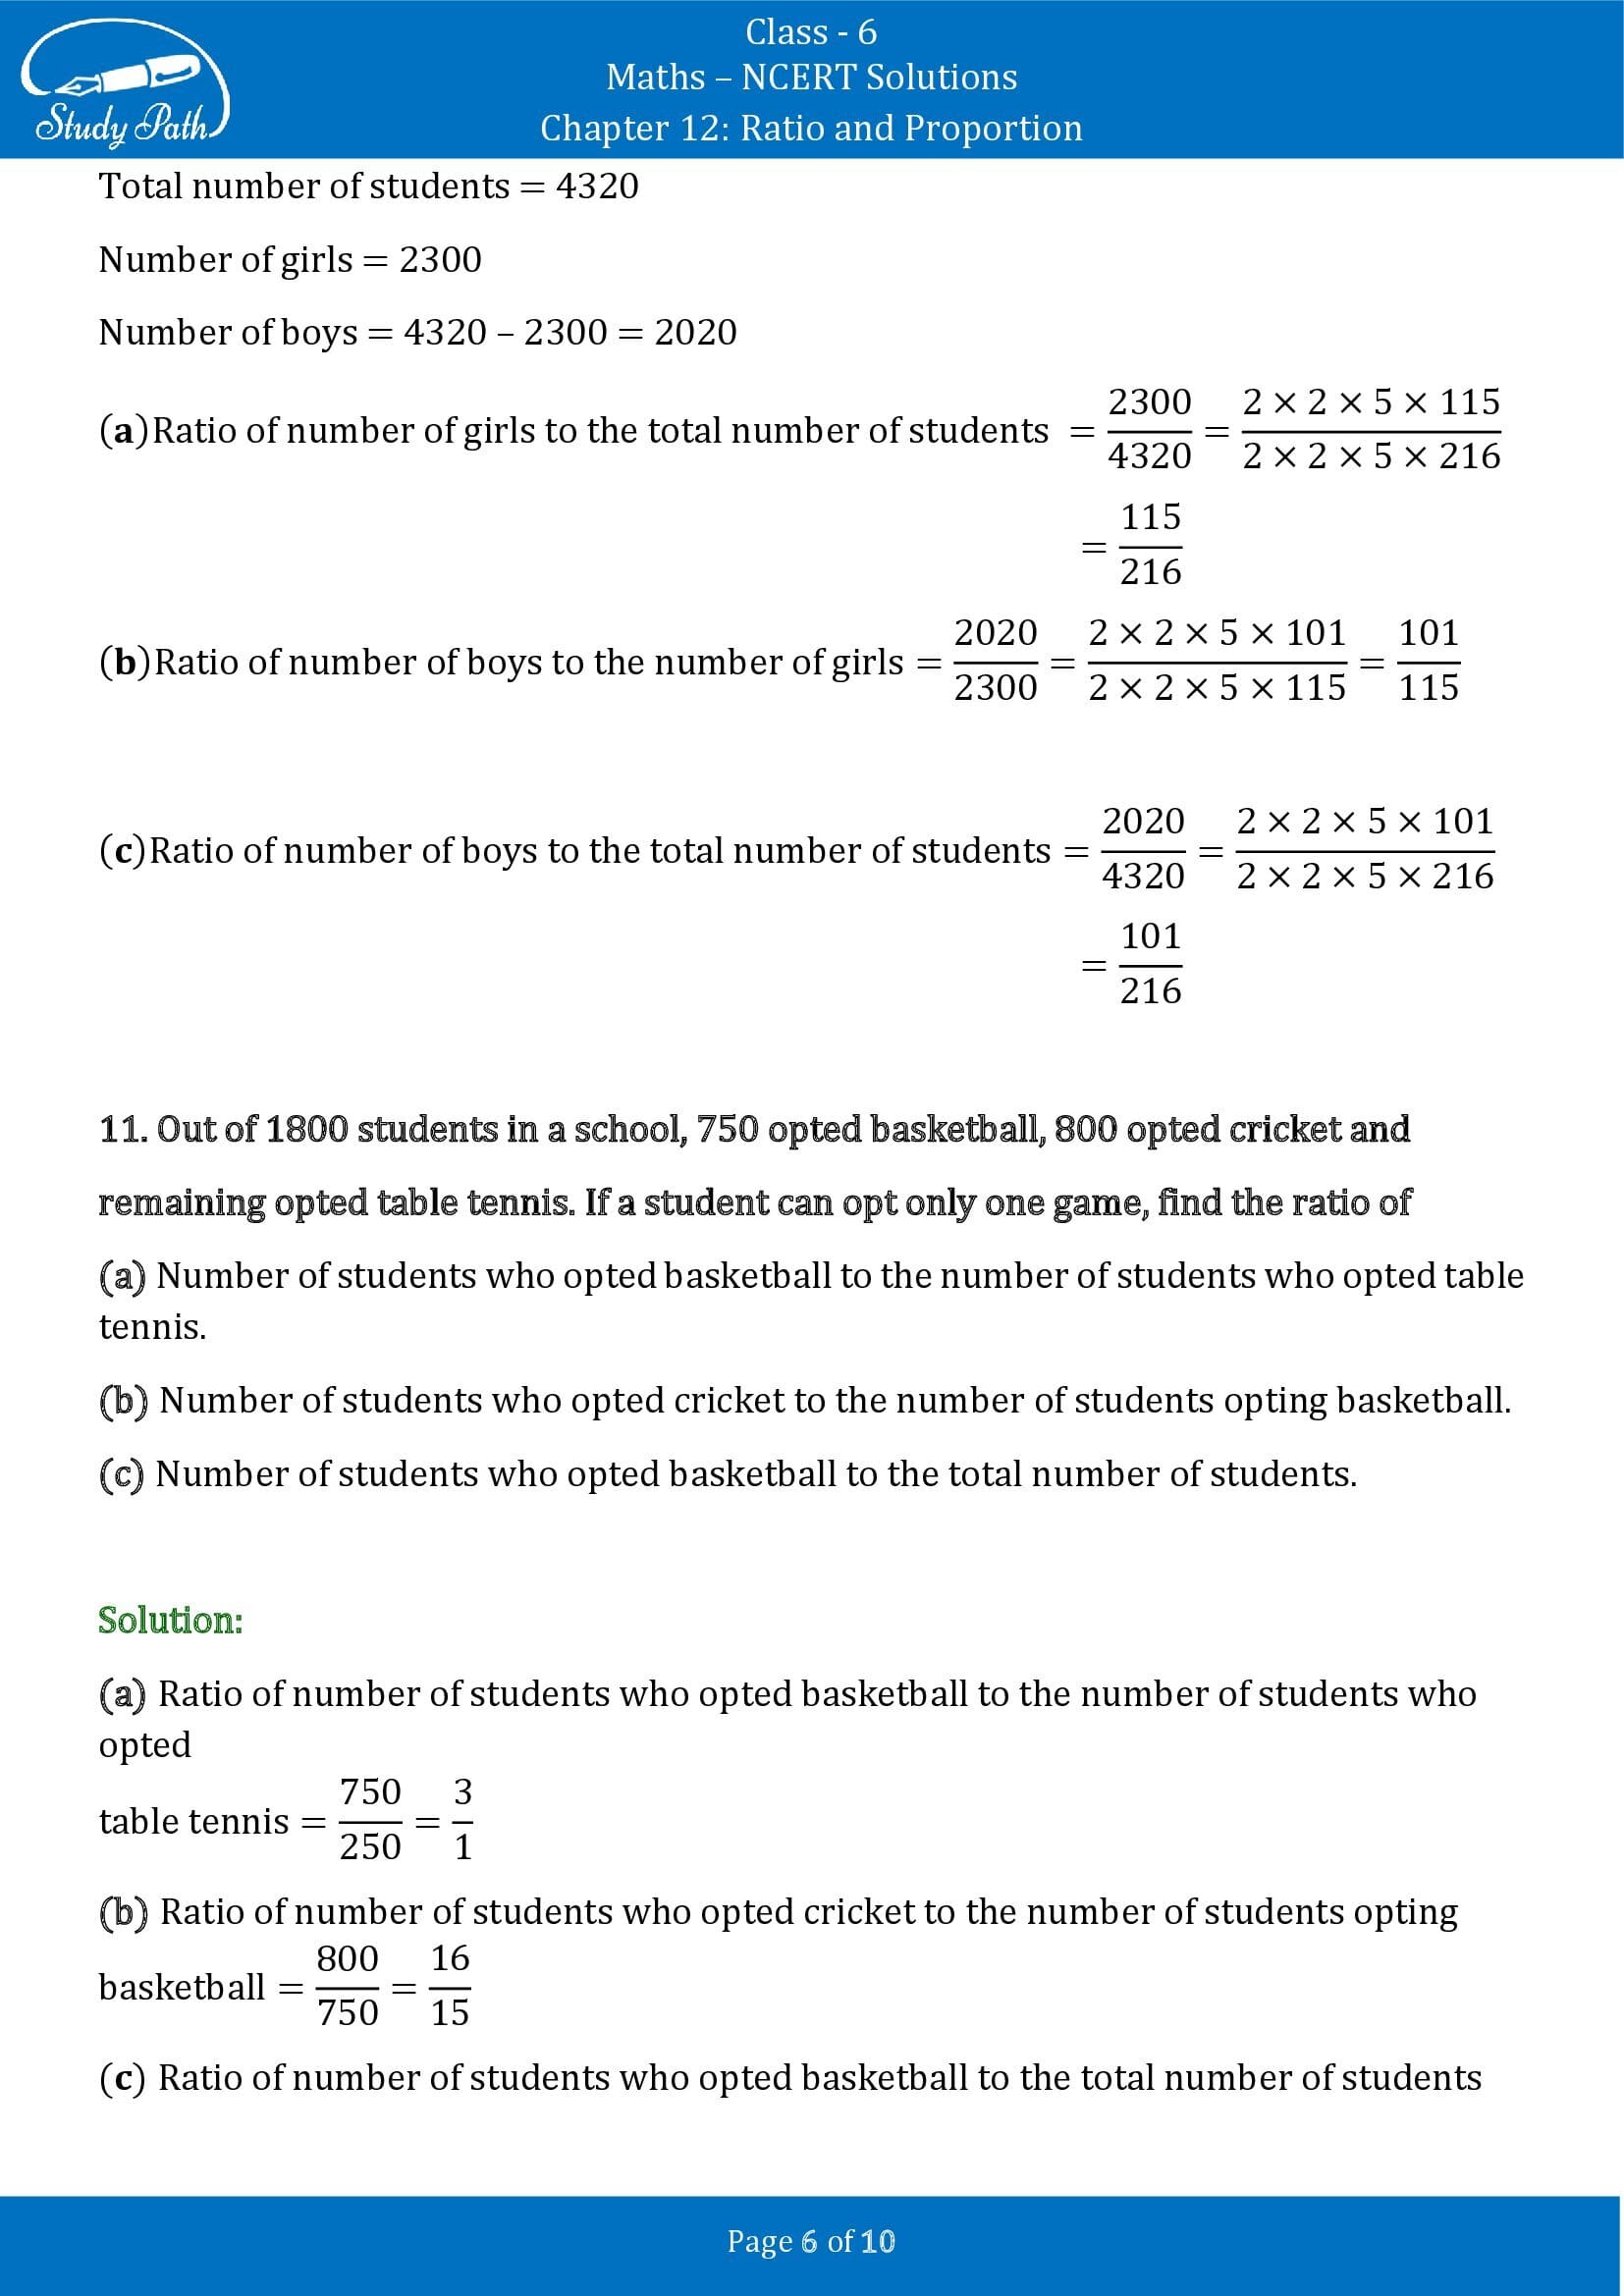 NCERT Solutions for Class 6 Maths Chapter 12 Ratio and Proportion Exercise 12.1 00006